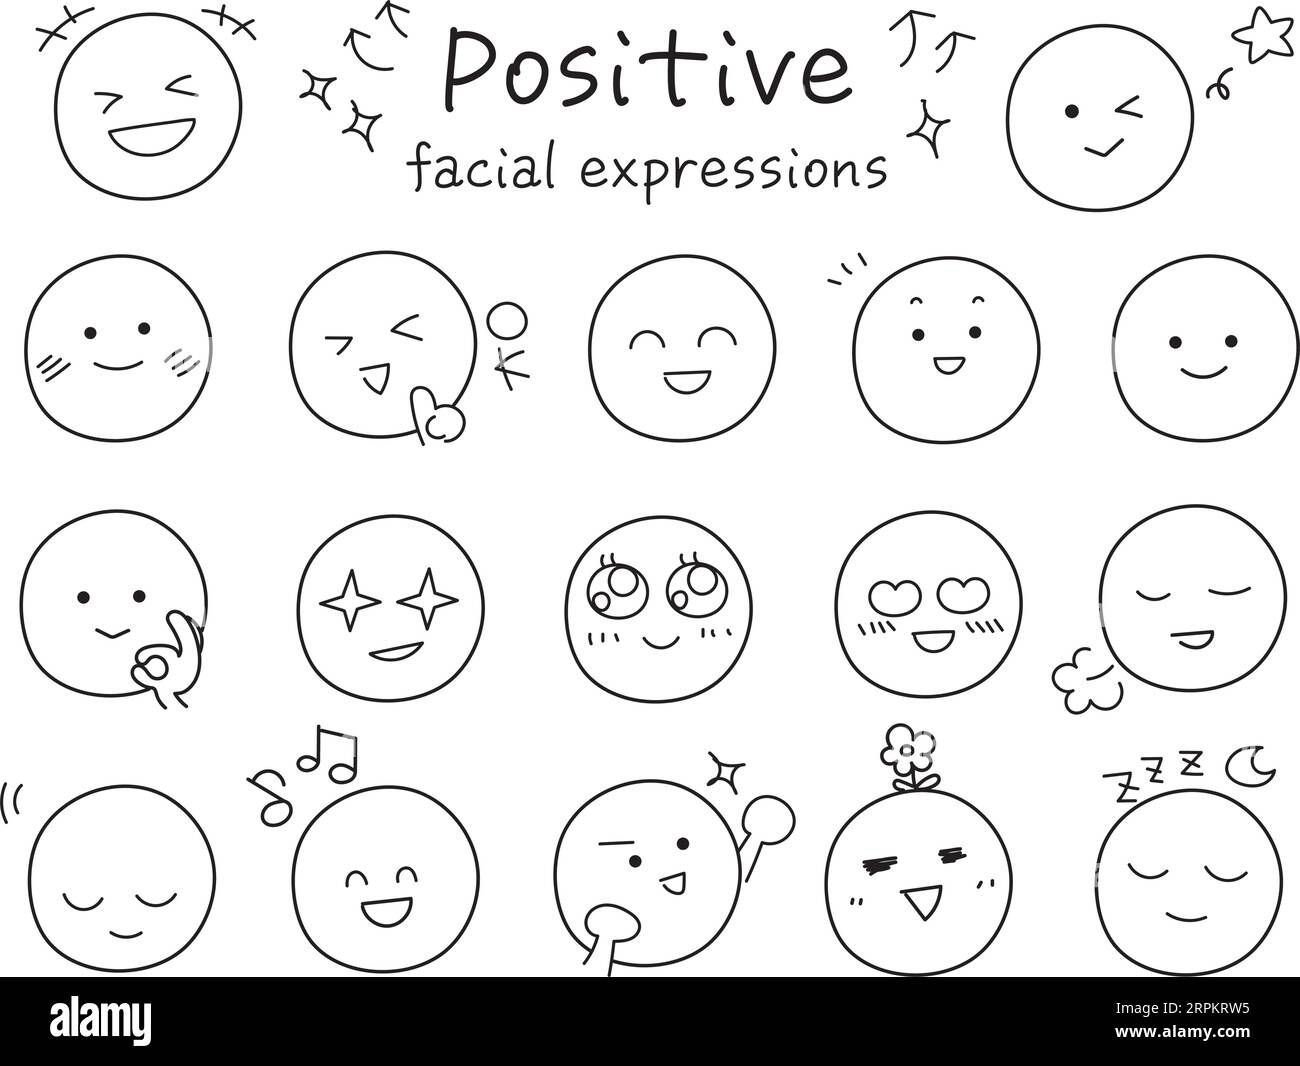 Simple and cute positive facial expression icon set. Black line drawing with hand-drawn touch.  Collection of funny emojis. Stock Vector